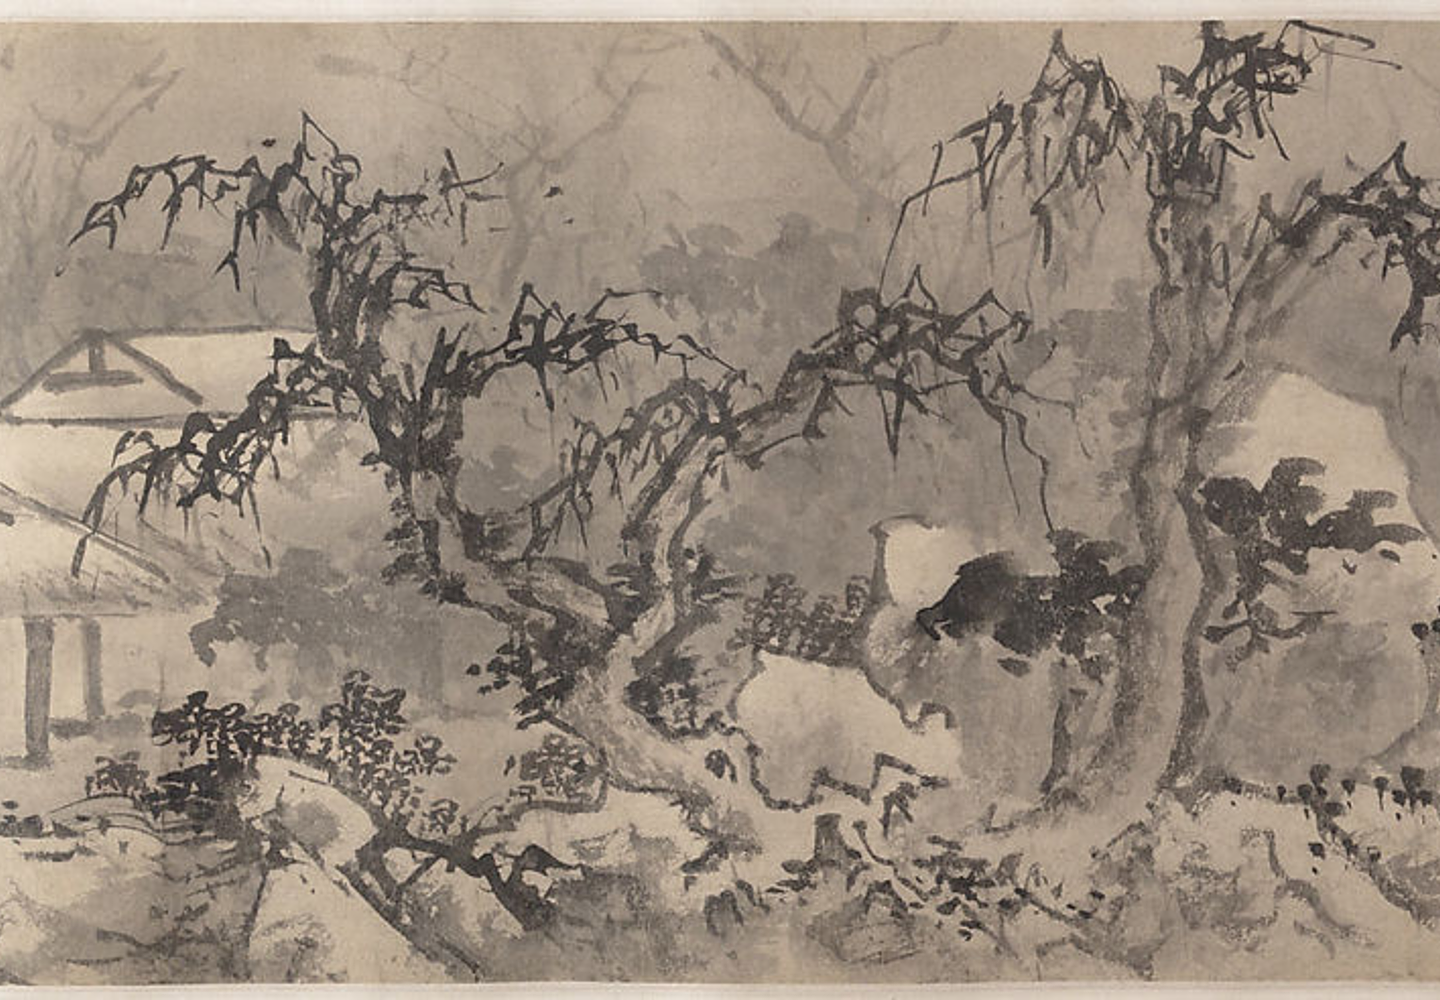 Companions in Solitude: Reclusion and Communion in Chinese Art